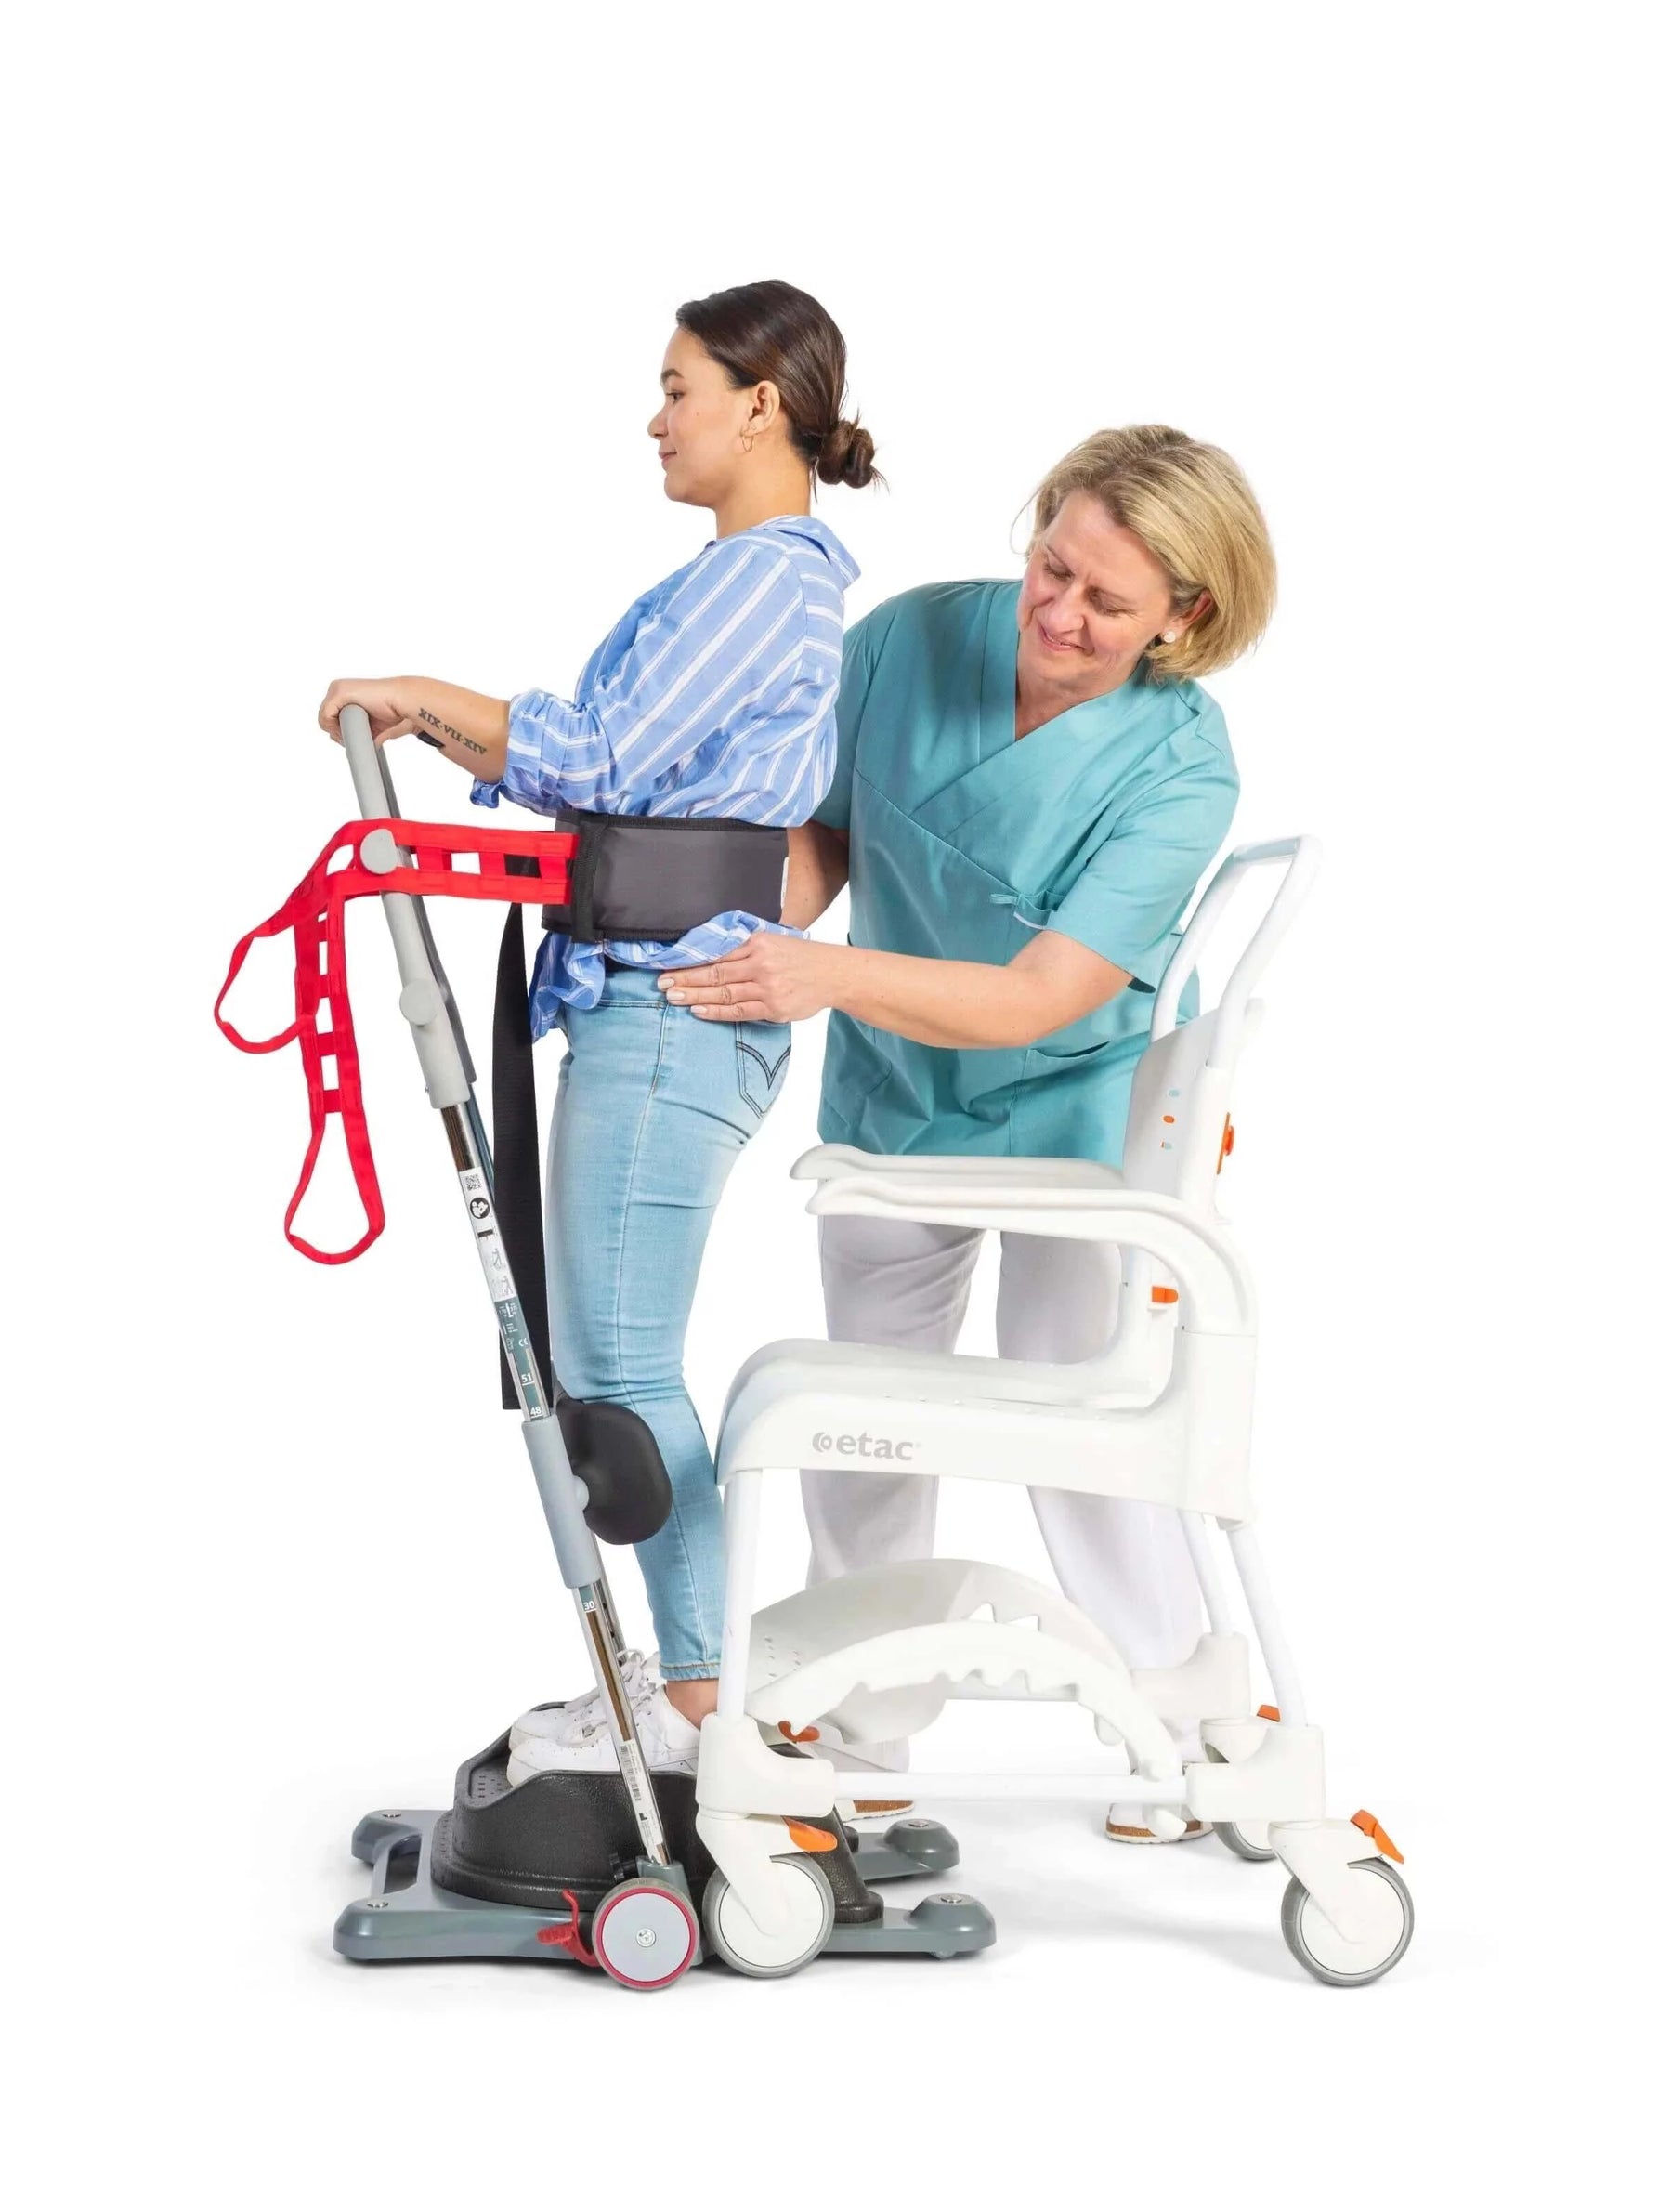 lady being helped up to use a sit to stand aid with the help of a nurse.